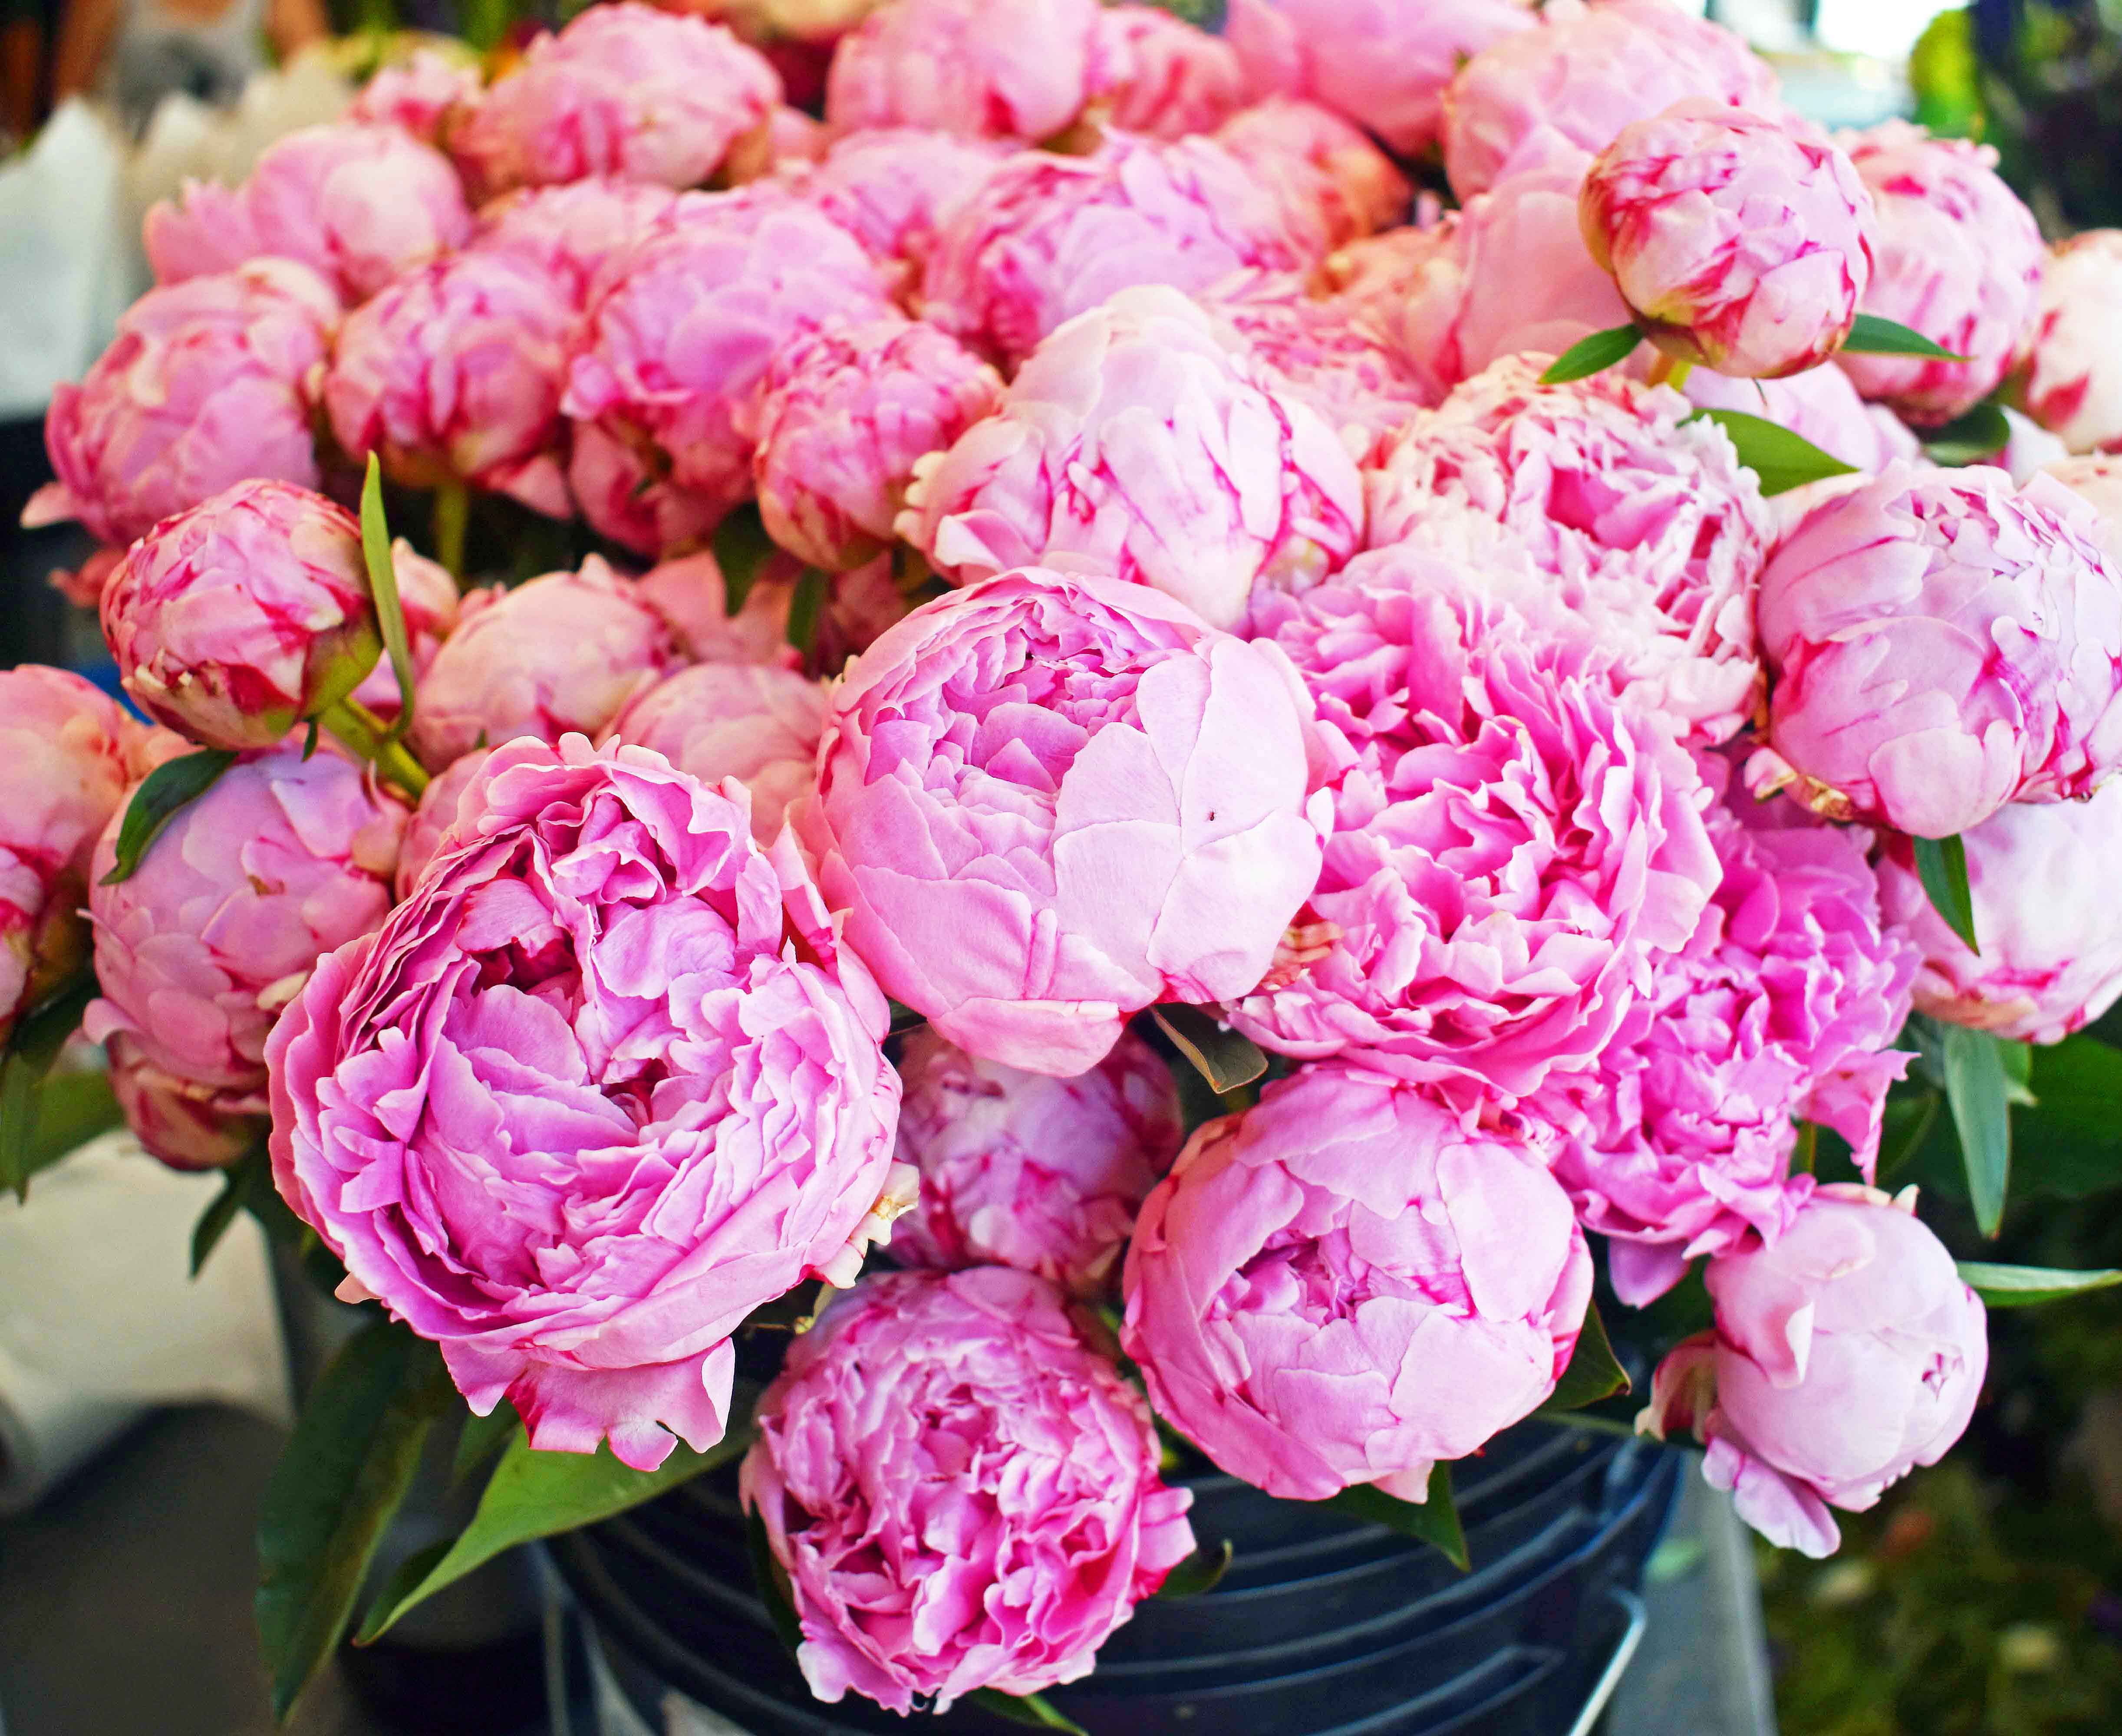 Pink peonies at Pike Place Market. Best Places to Eat and See in Seattle. The most popular spots to visit and the best restaurants. Tips on the best places to see in Seattle Washington. www.modernhoney.com